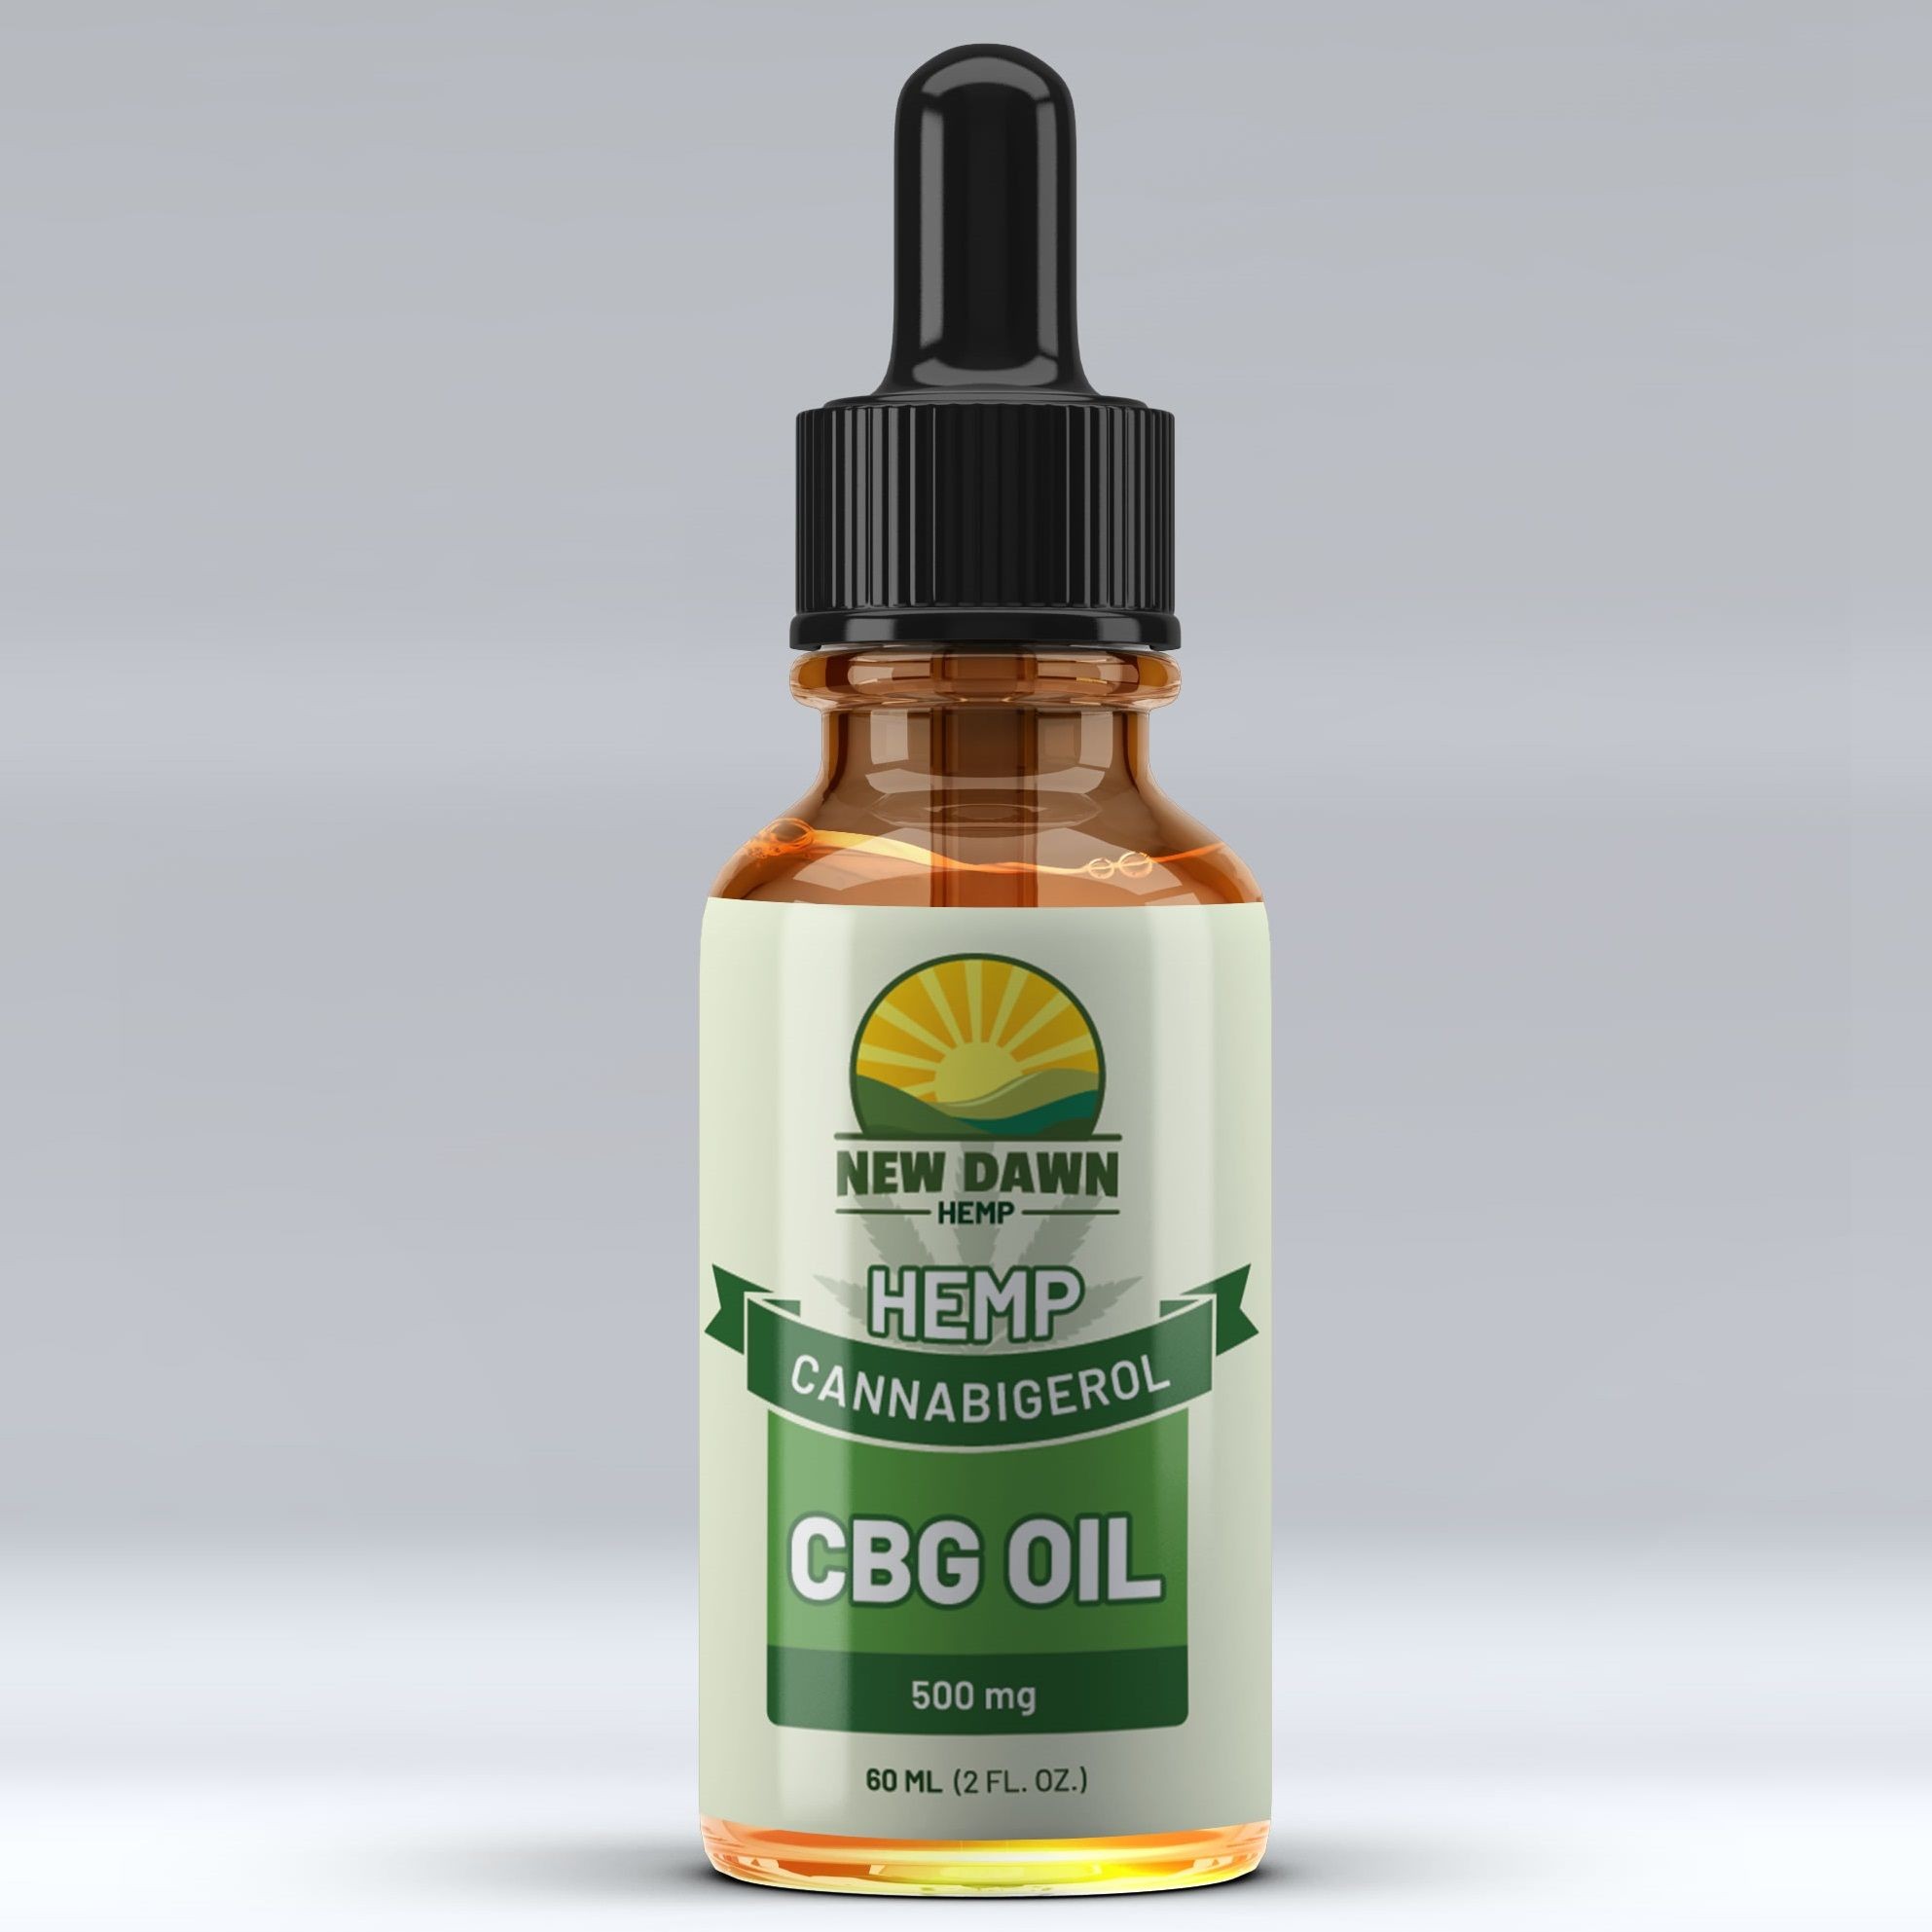 Private Label Cbg Products - Cbg|Gummies|Cbd|Effects|Thc|Cannabinoid|Hemp|Cannabinoids|Image|Products|Courtesy|Product|Way|Benefits|Dosage|Everyone|Oil|People|Spectrum|Others|Gummy|Time|Dosages|Advantages|Cannabis|Results|Treatment|Body|Stomach|Tincture|Pain|Drug|Approach|Isolate|Side|Dog|Ingredients|List|State|Cannabigerol|Cbg Gummies|Psychoactive Effects|Full Spectrum Gummies|Image Courtesy|Full-Spectrum Cbd Products|Different Dosages|Right Dosage|Empty Stomach|Cbd Gummies|Cbd Isolate|Side Effects|Different Effects|Dog Cbg Gummies|Drug Test|Full-Spectrum Cbd Product|Few Things|Chronic Pain|Full-Spectrum Cbd|Psychotropic Effects|Final Thoughts|Right Dosage Everyone|Final Tips|Same Results|Cbg Ratio|Appetite Loss|Powerful Hunger Stimulant|Whereas Cbd|Thc Ratio Gummies|Dangerous Consequence|Numerous Diseases